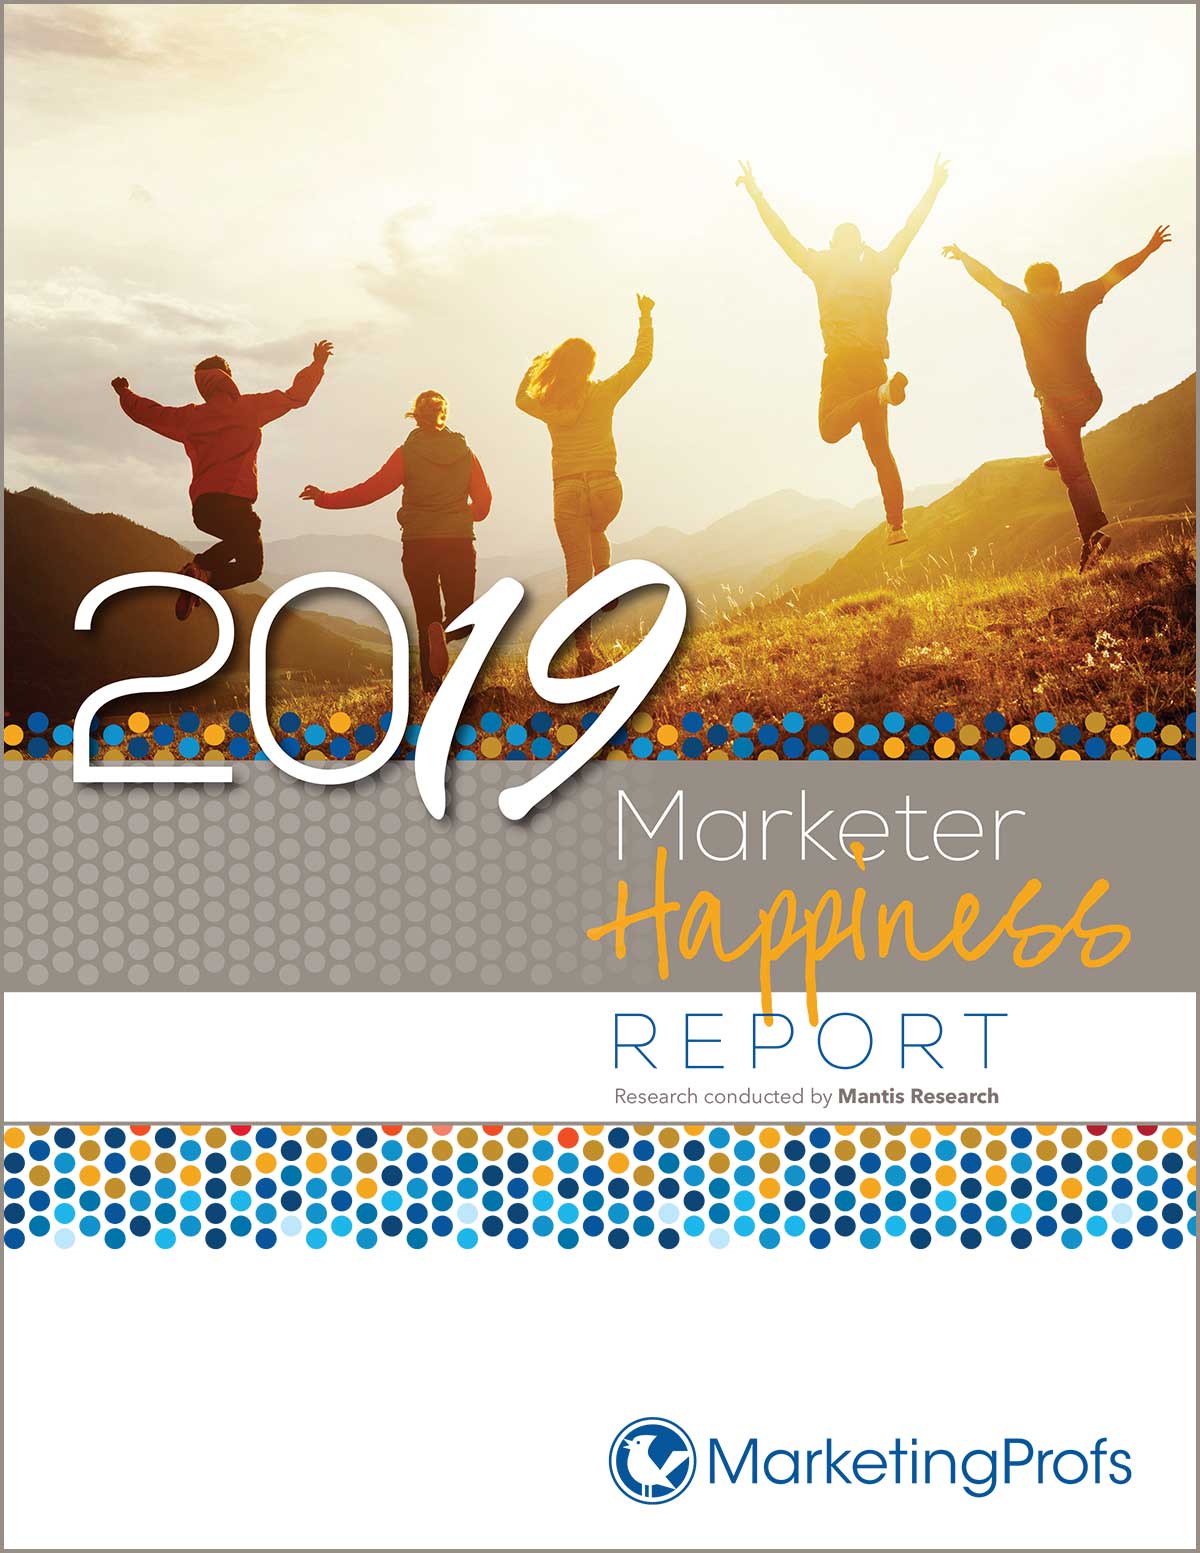 2019 Marketer Happiness Report